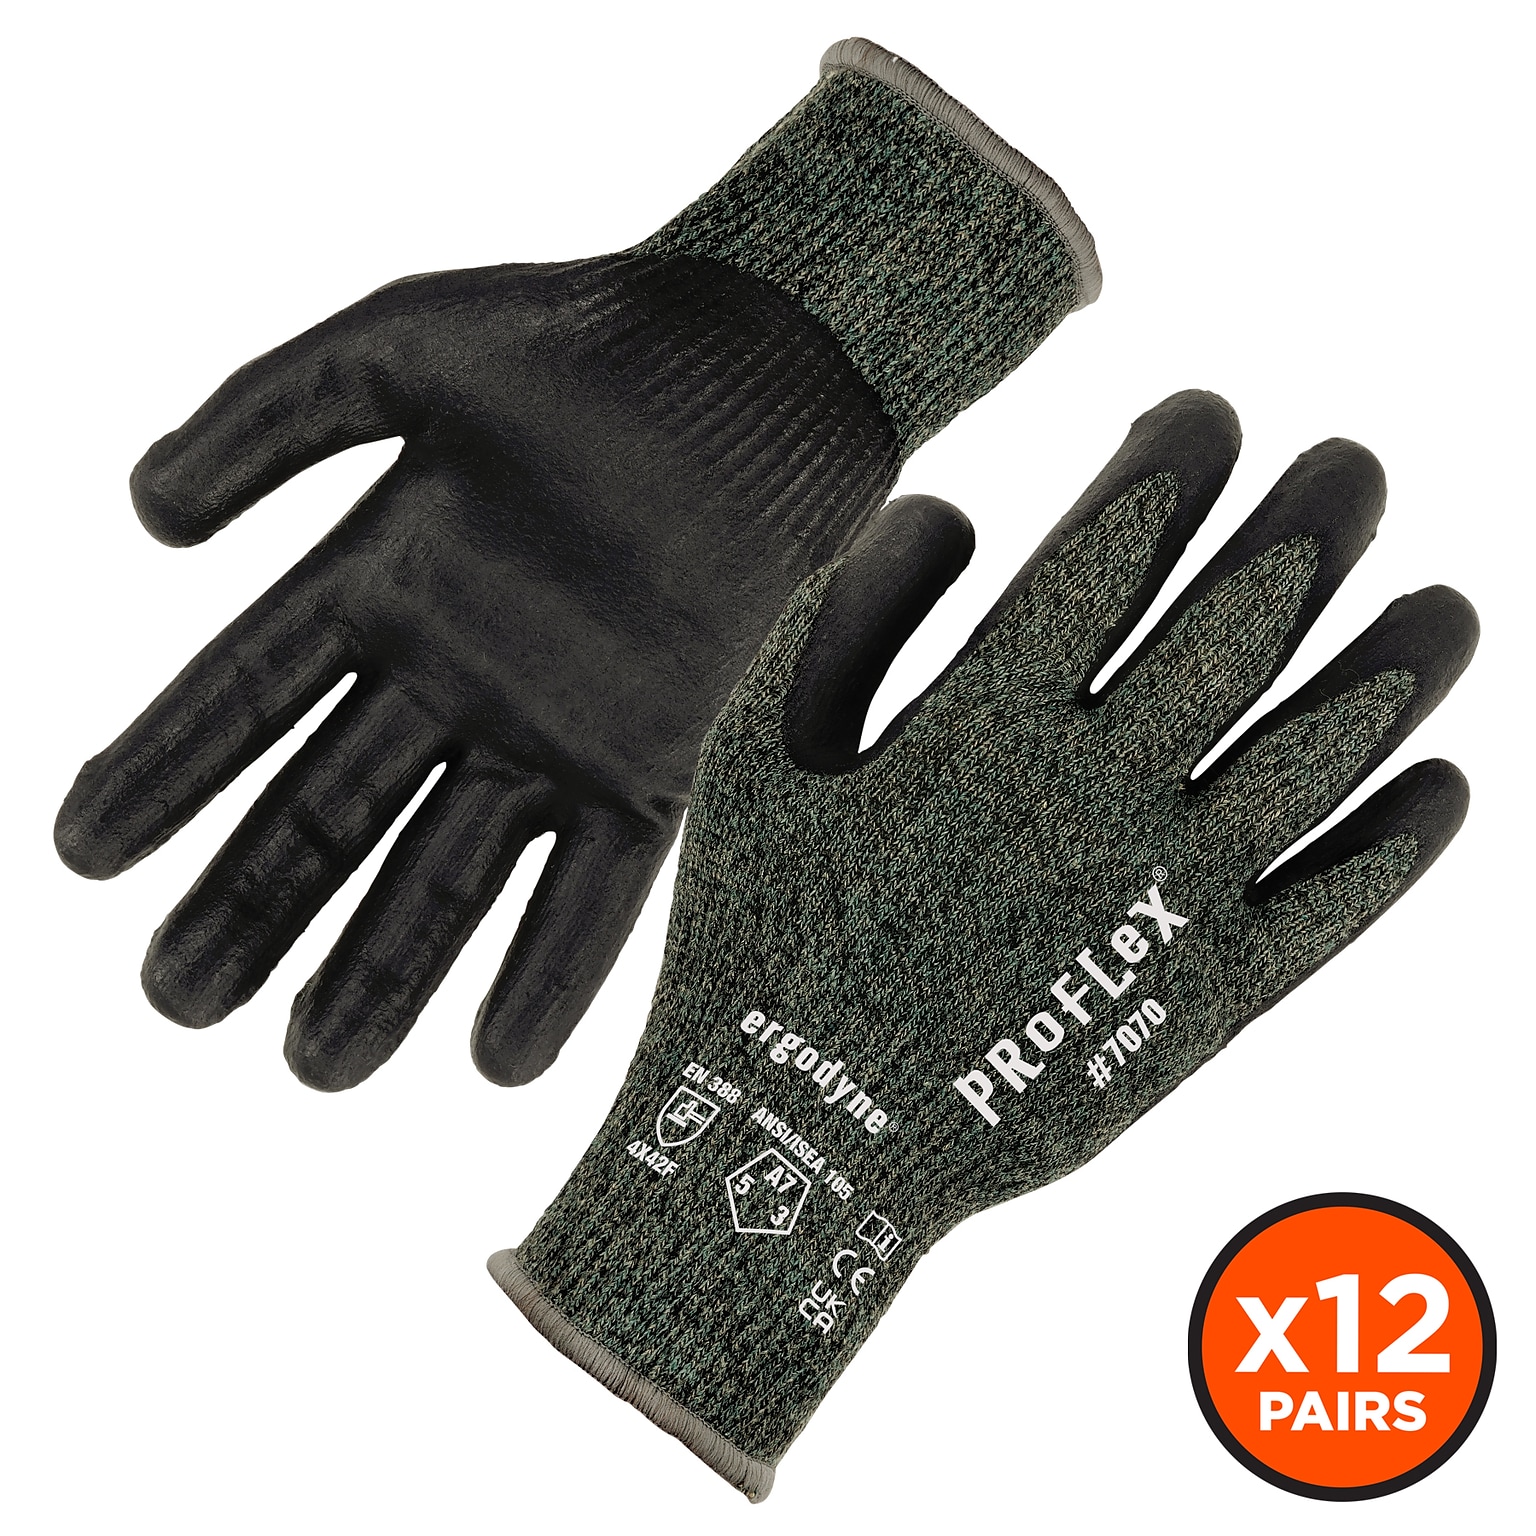 Ergodyne ProFlex 7070 Nitrile Coated Cut-Resistant Gloves, ANSI A7, Heat Resistant, Green, Small, 12 Pair (18032)